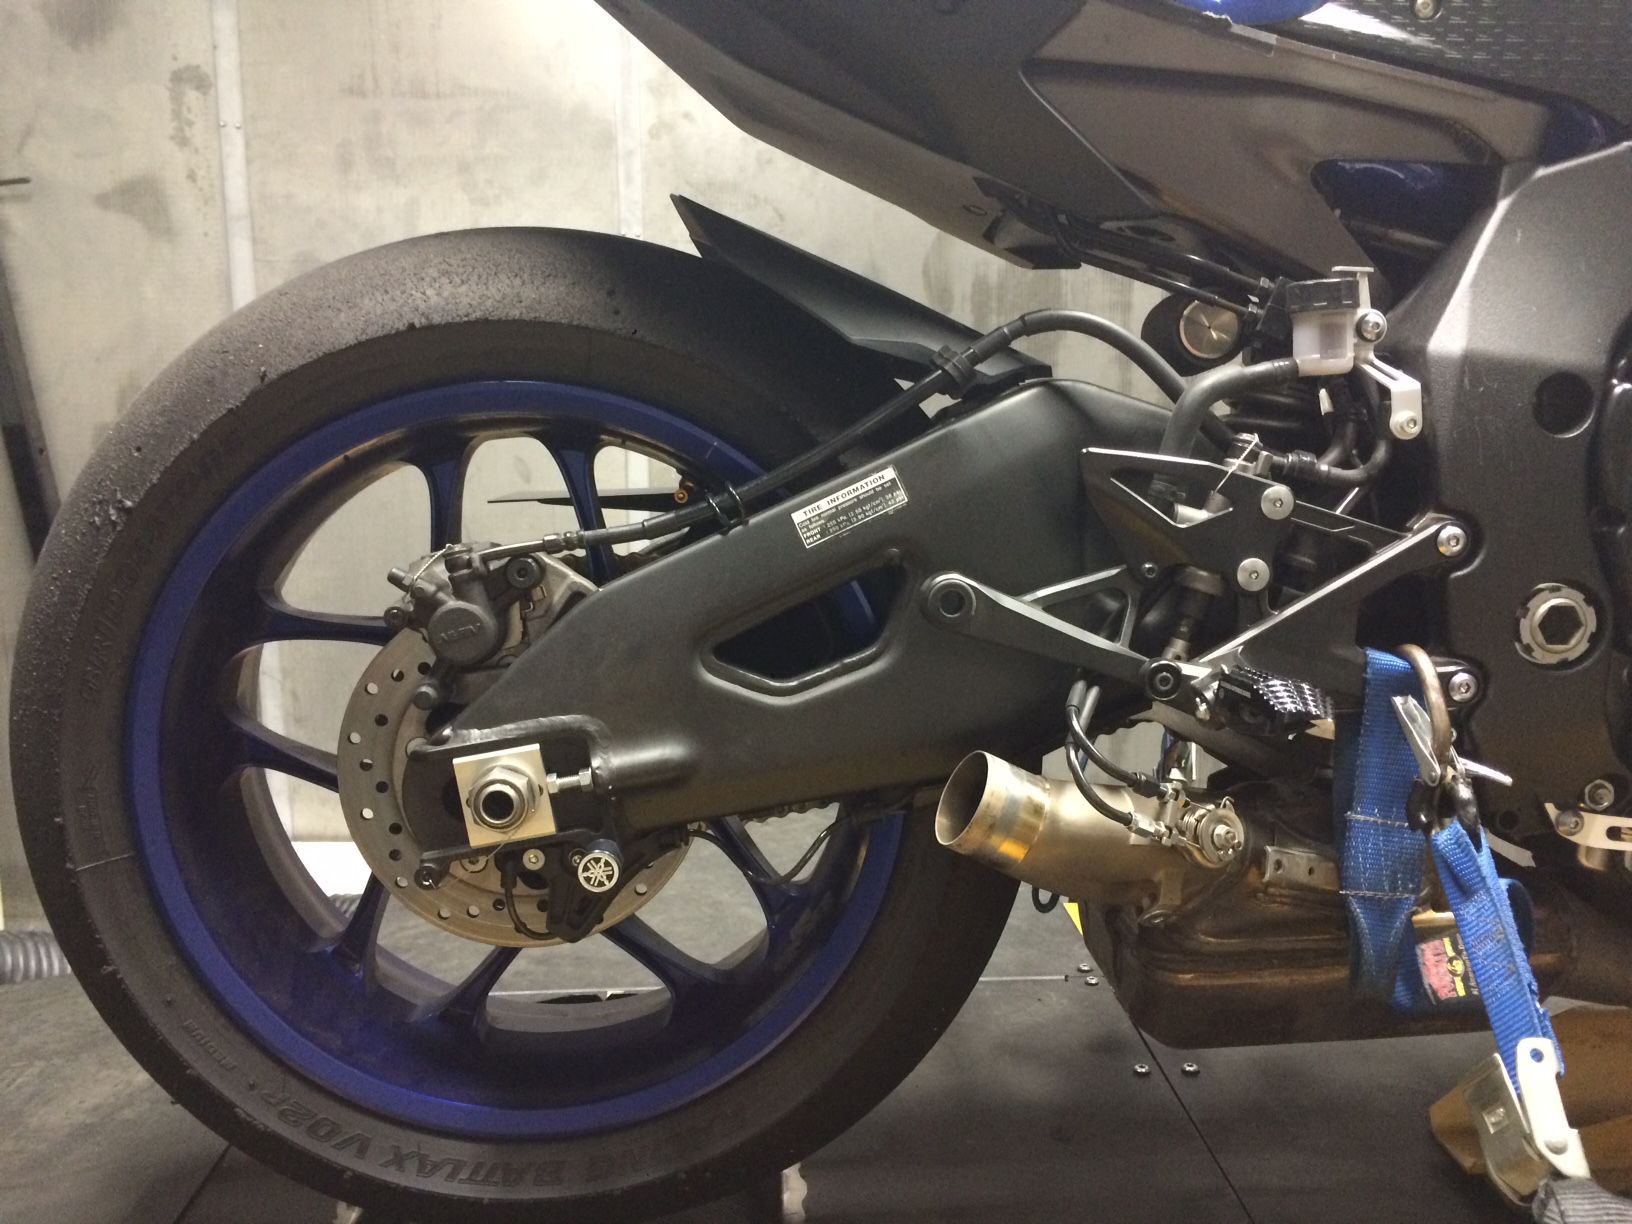 NICECNC Performance Exhaust Mid Pipe & Painted Carbon Fiber Tail Muffler for R1 R1M R1S YZF-R1 2015 2016 2017 